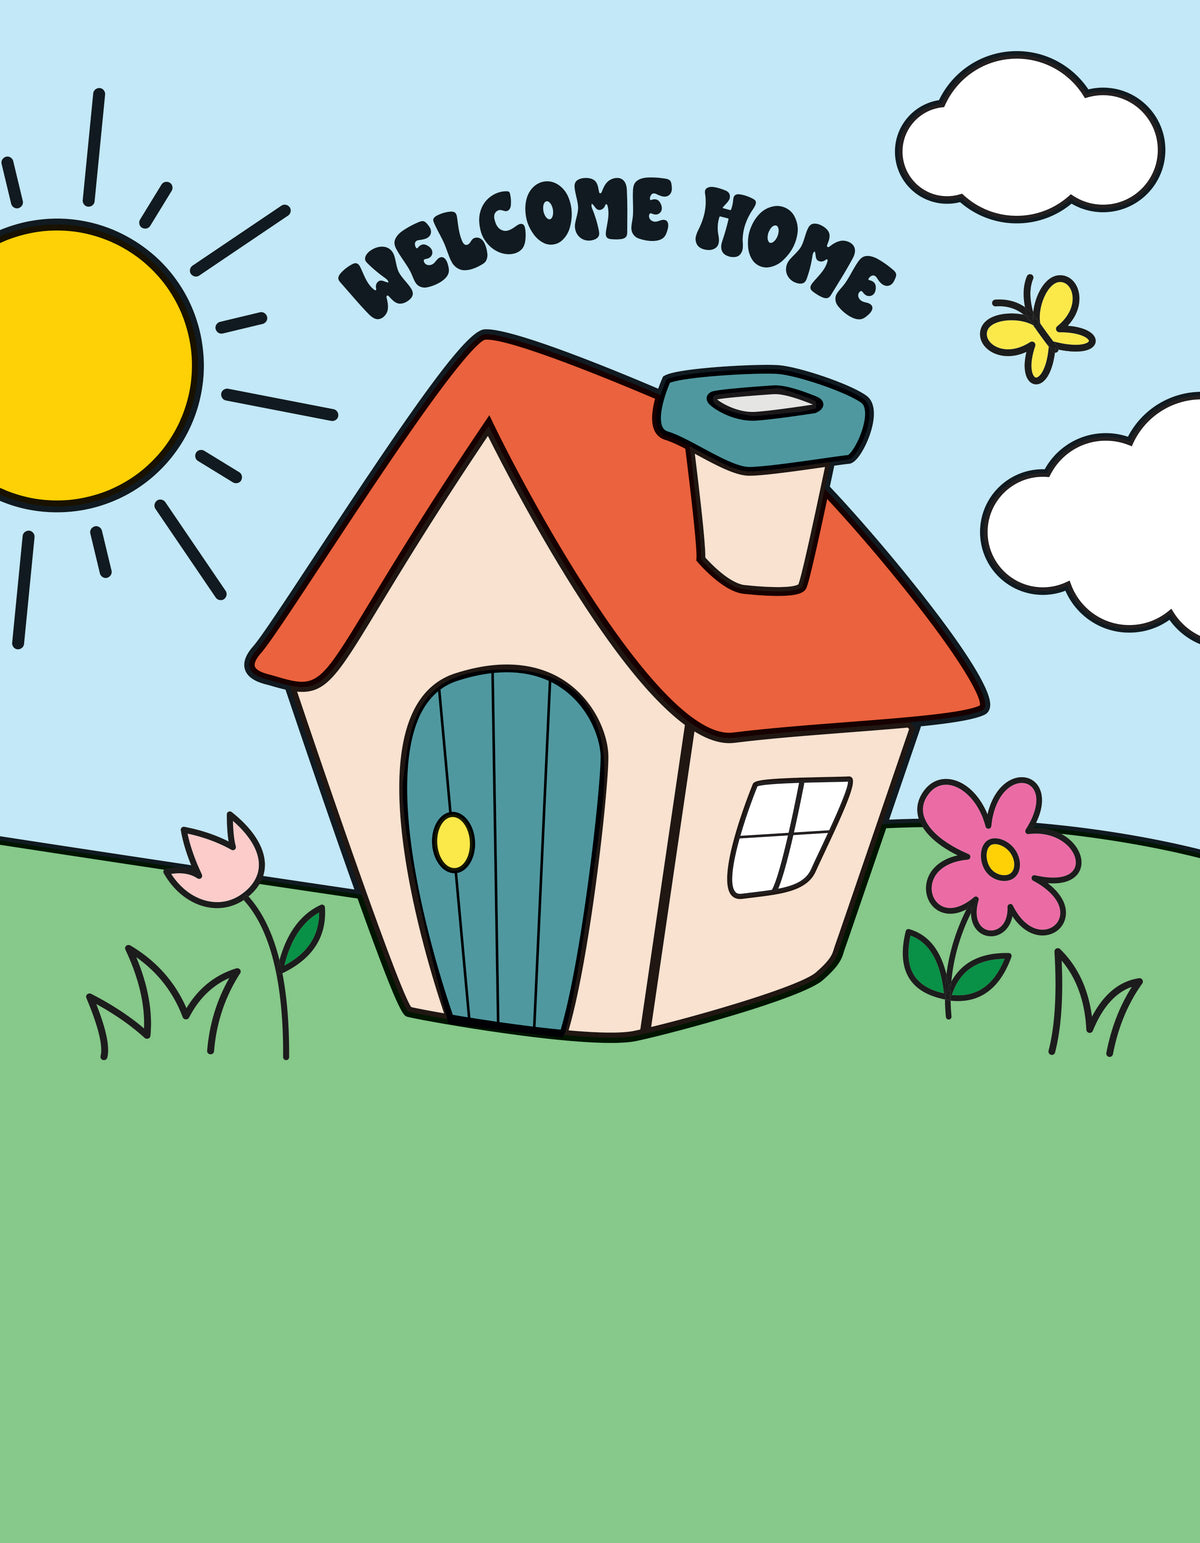 Welcome Home coloring book for realtors.